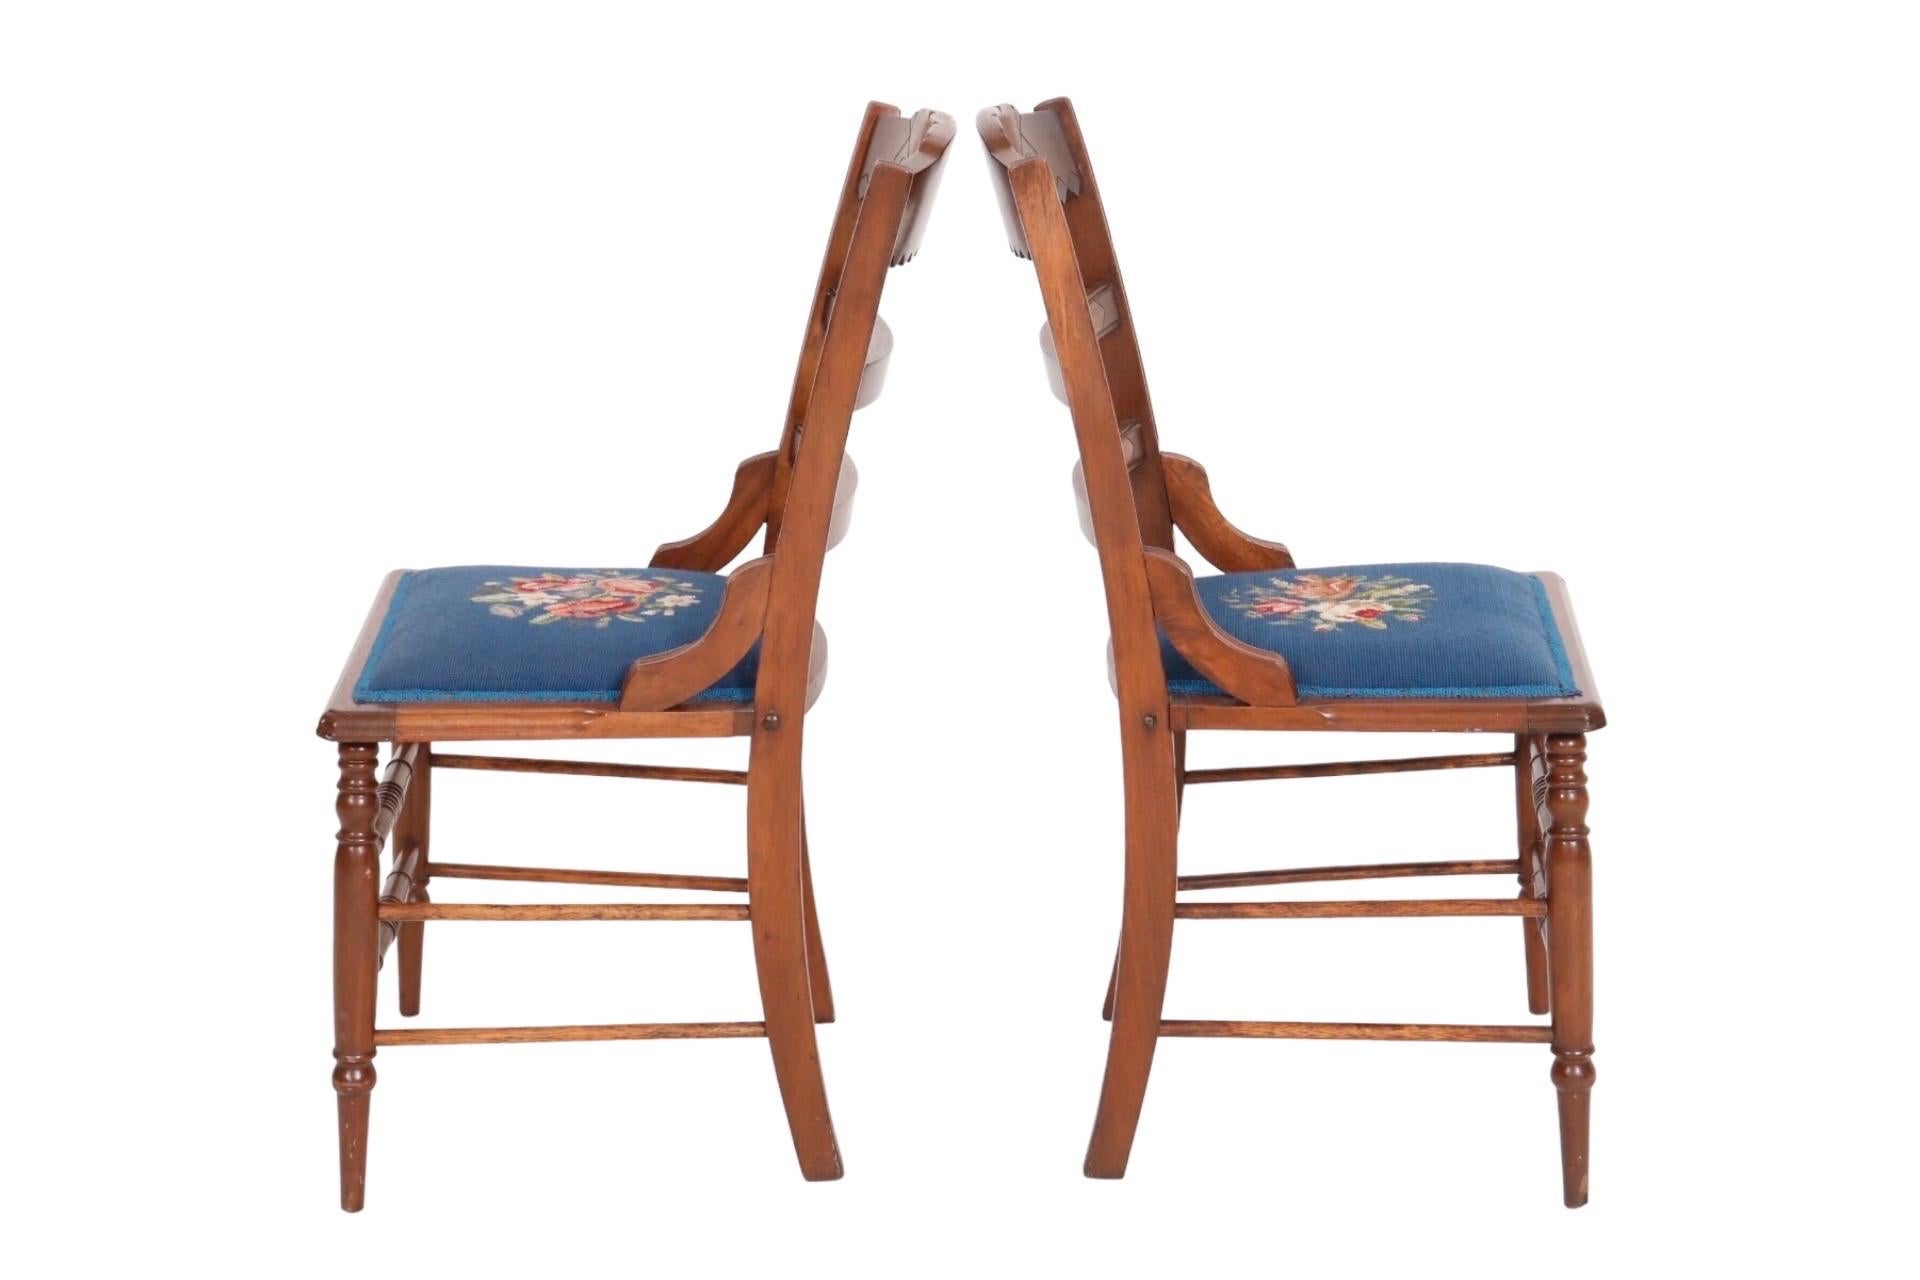 A pair of carved Eastlake period side chairs with needlepoint upholstered seats. The crest rail is decorated with birdseye maple and a square motif with beveled concentric circles. Turned legs are connected with a double box stretcher. The seat